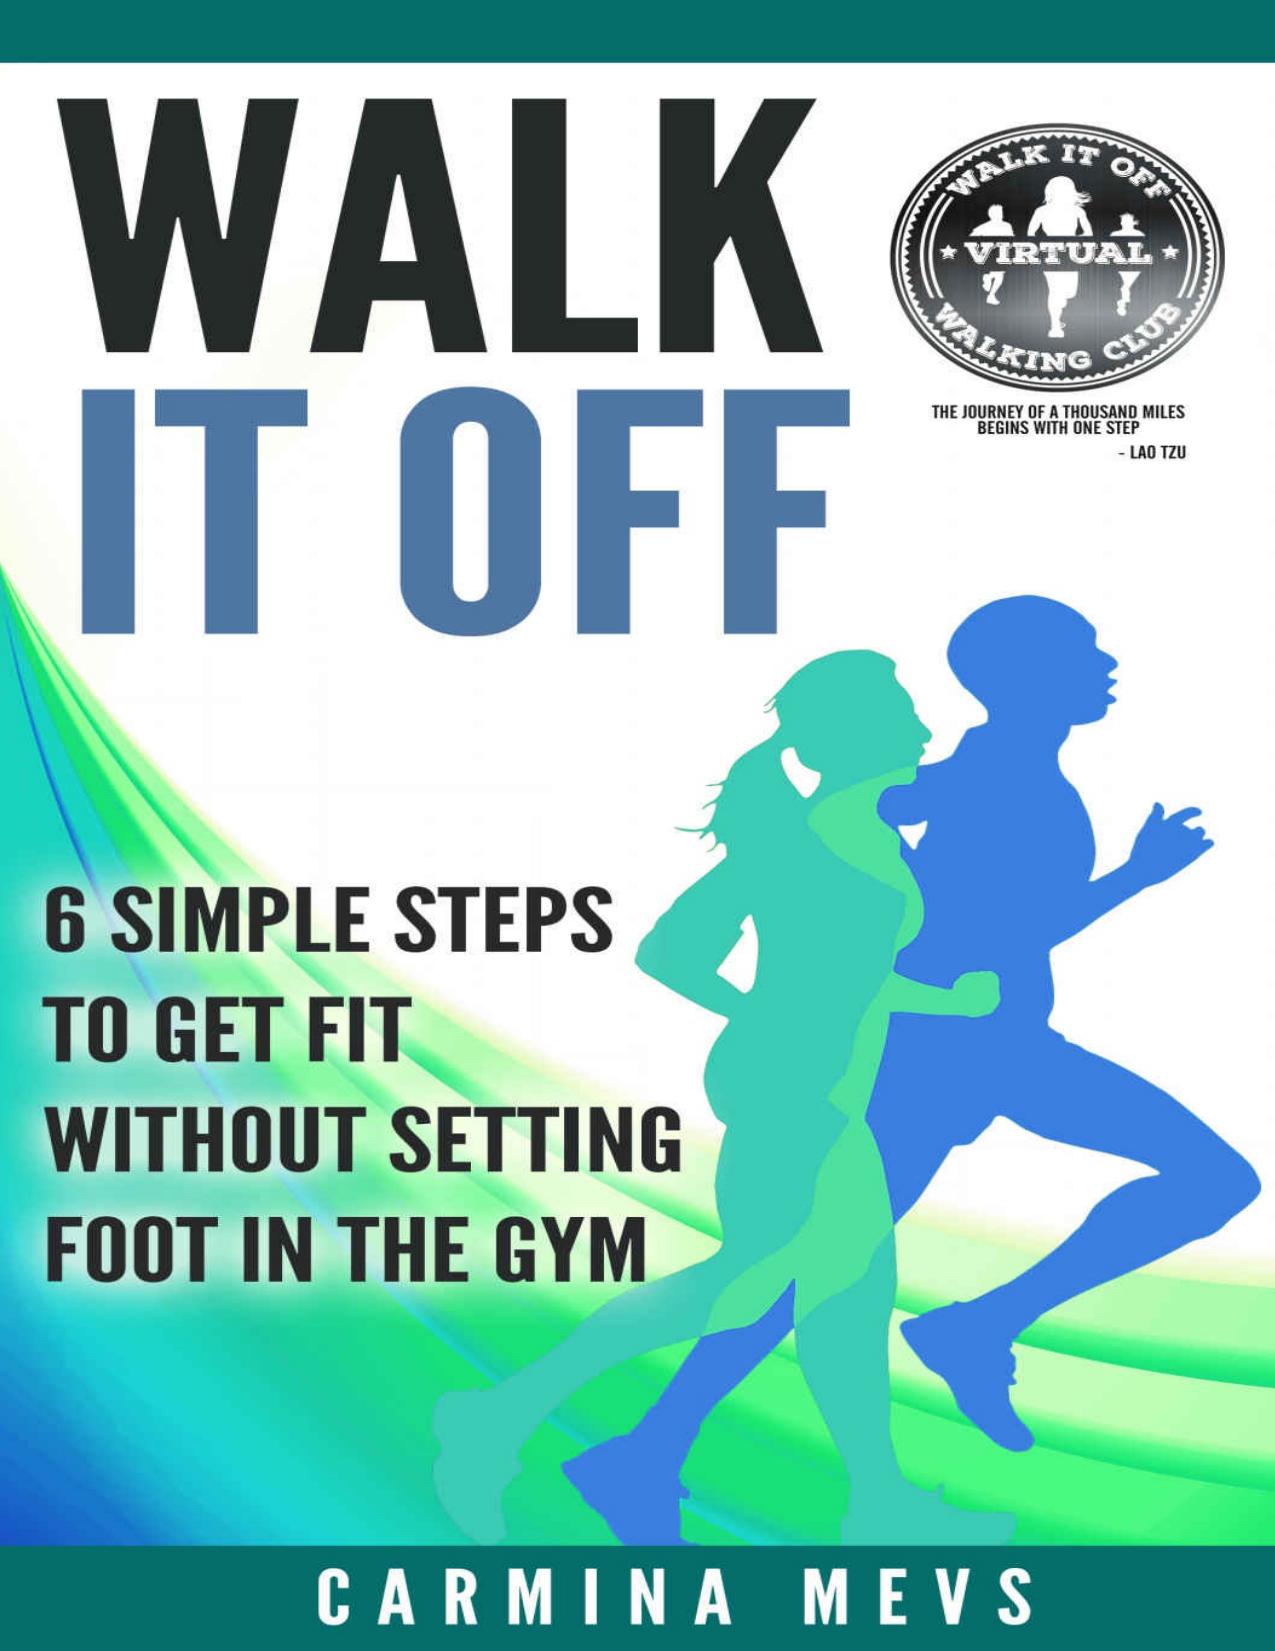 Walk It Off: 6 Simple Steps to Get Fit Without Setting Foot in the Gym by Carmina Mevs